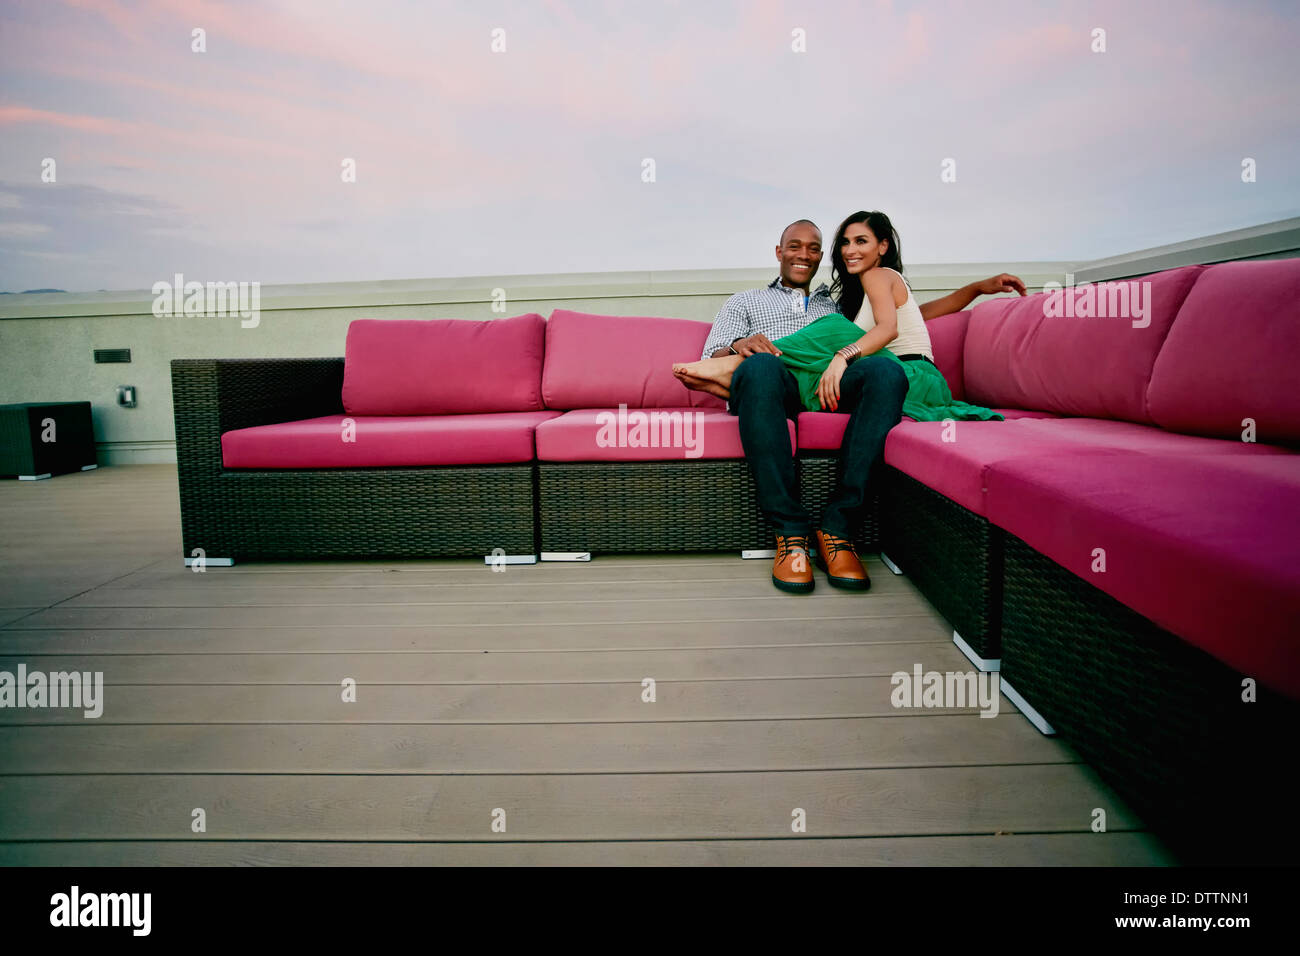 Couple relaxing on sofa outdoors Stock Photo